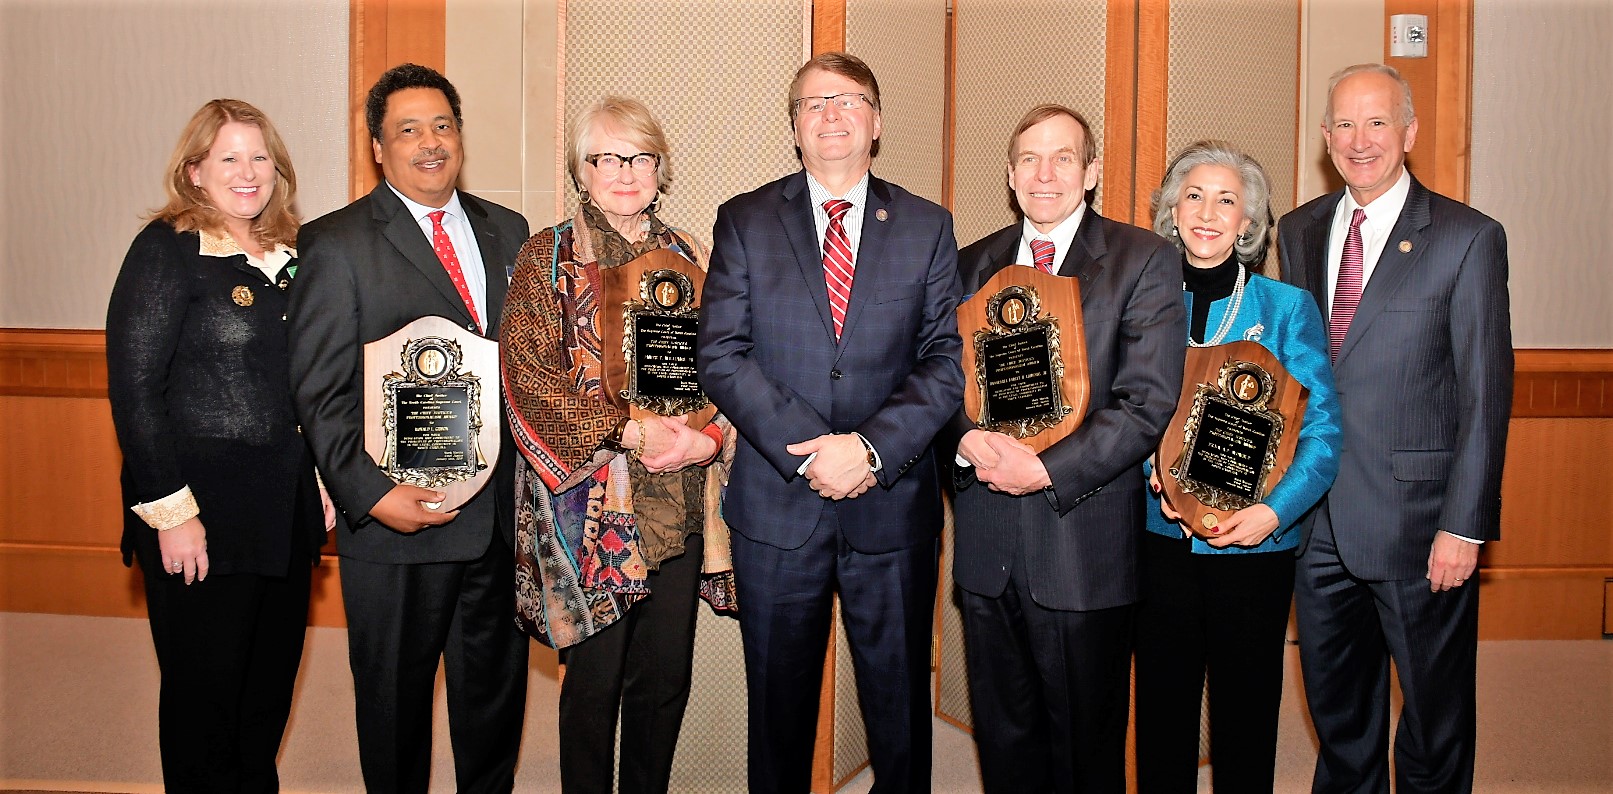 From left to right: CJCP Excutive Director Lisa Sheppard, Ronald L. Gibson, Barbara Williams, Chief Justice Mark Martin, Justice Robert Edmunds (Ret.), Erna A.P. Womble, Senior Associate Justice Paul Newby